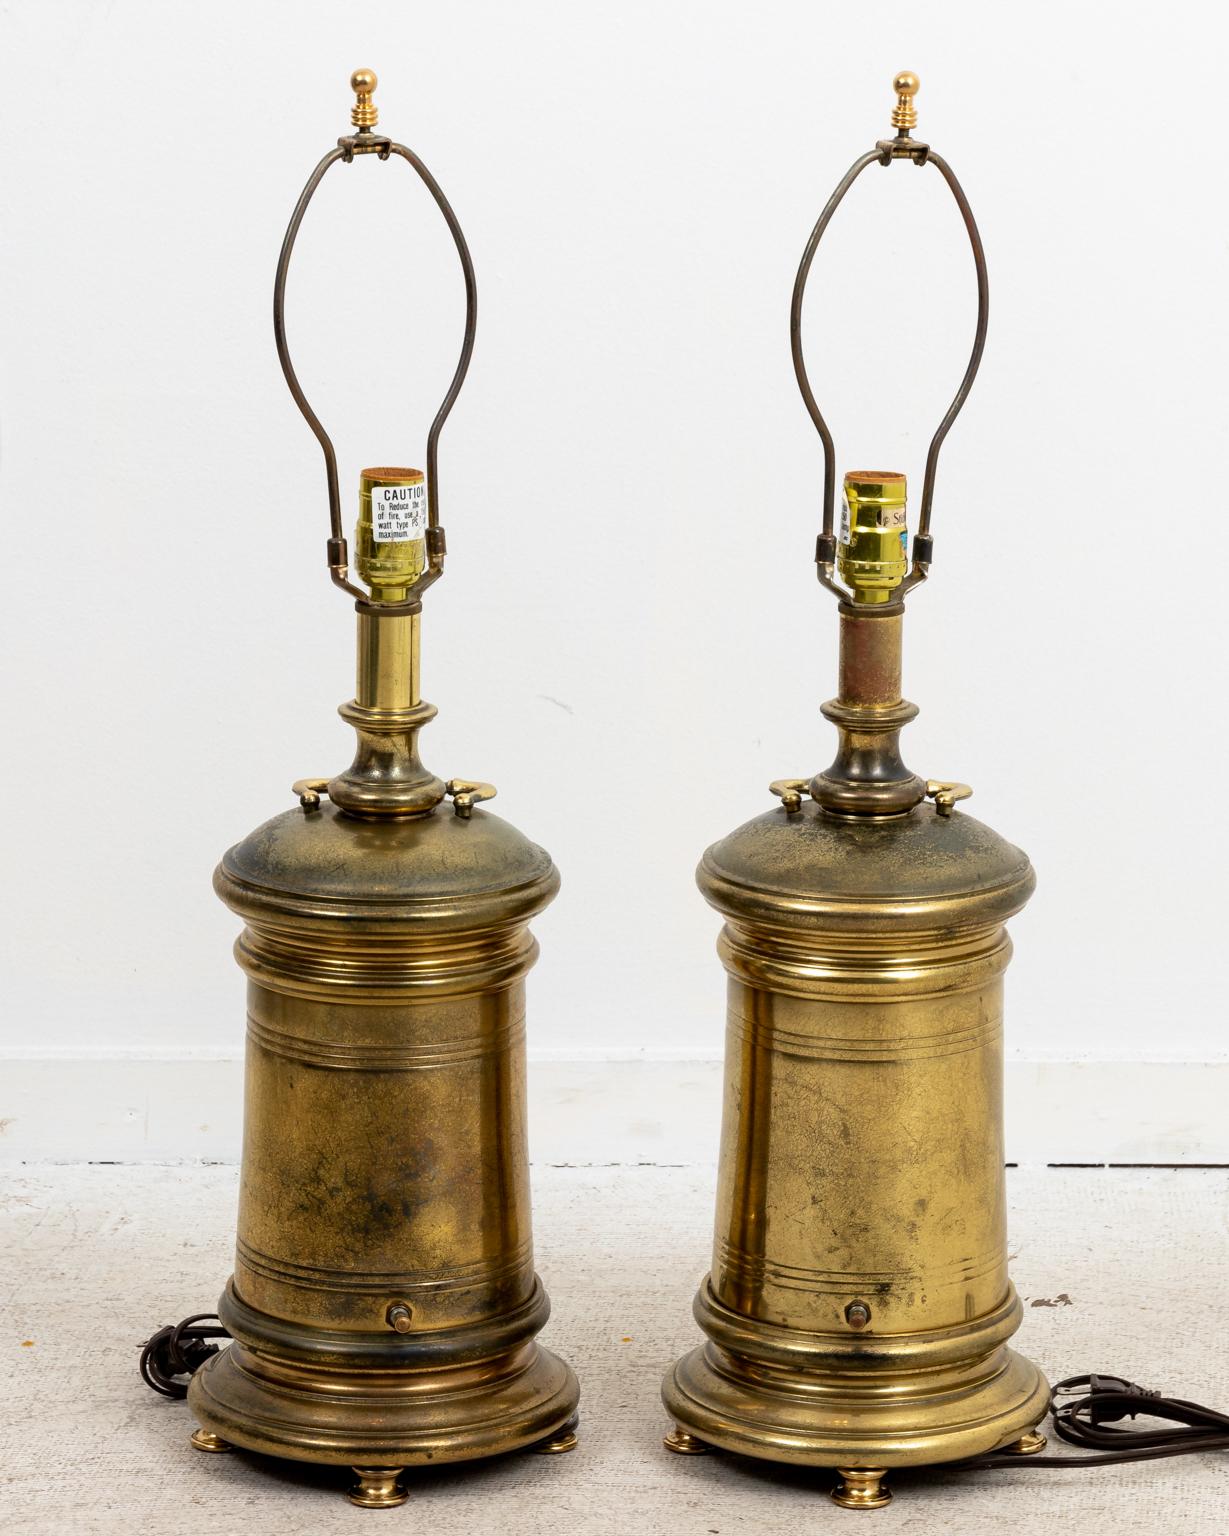 Circa 1950s robust pair of brass cylinder lamps on four brass feet with ring turned detail. Made in the United States. Please note of wear consistent with age including pitting and wear to the brass. The piece measures 28.00 Inches height to finial.